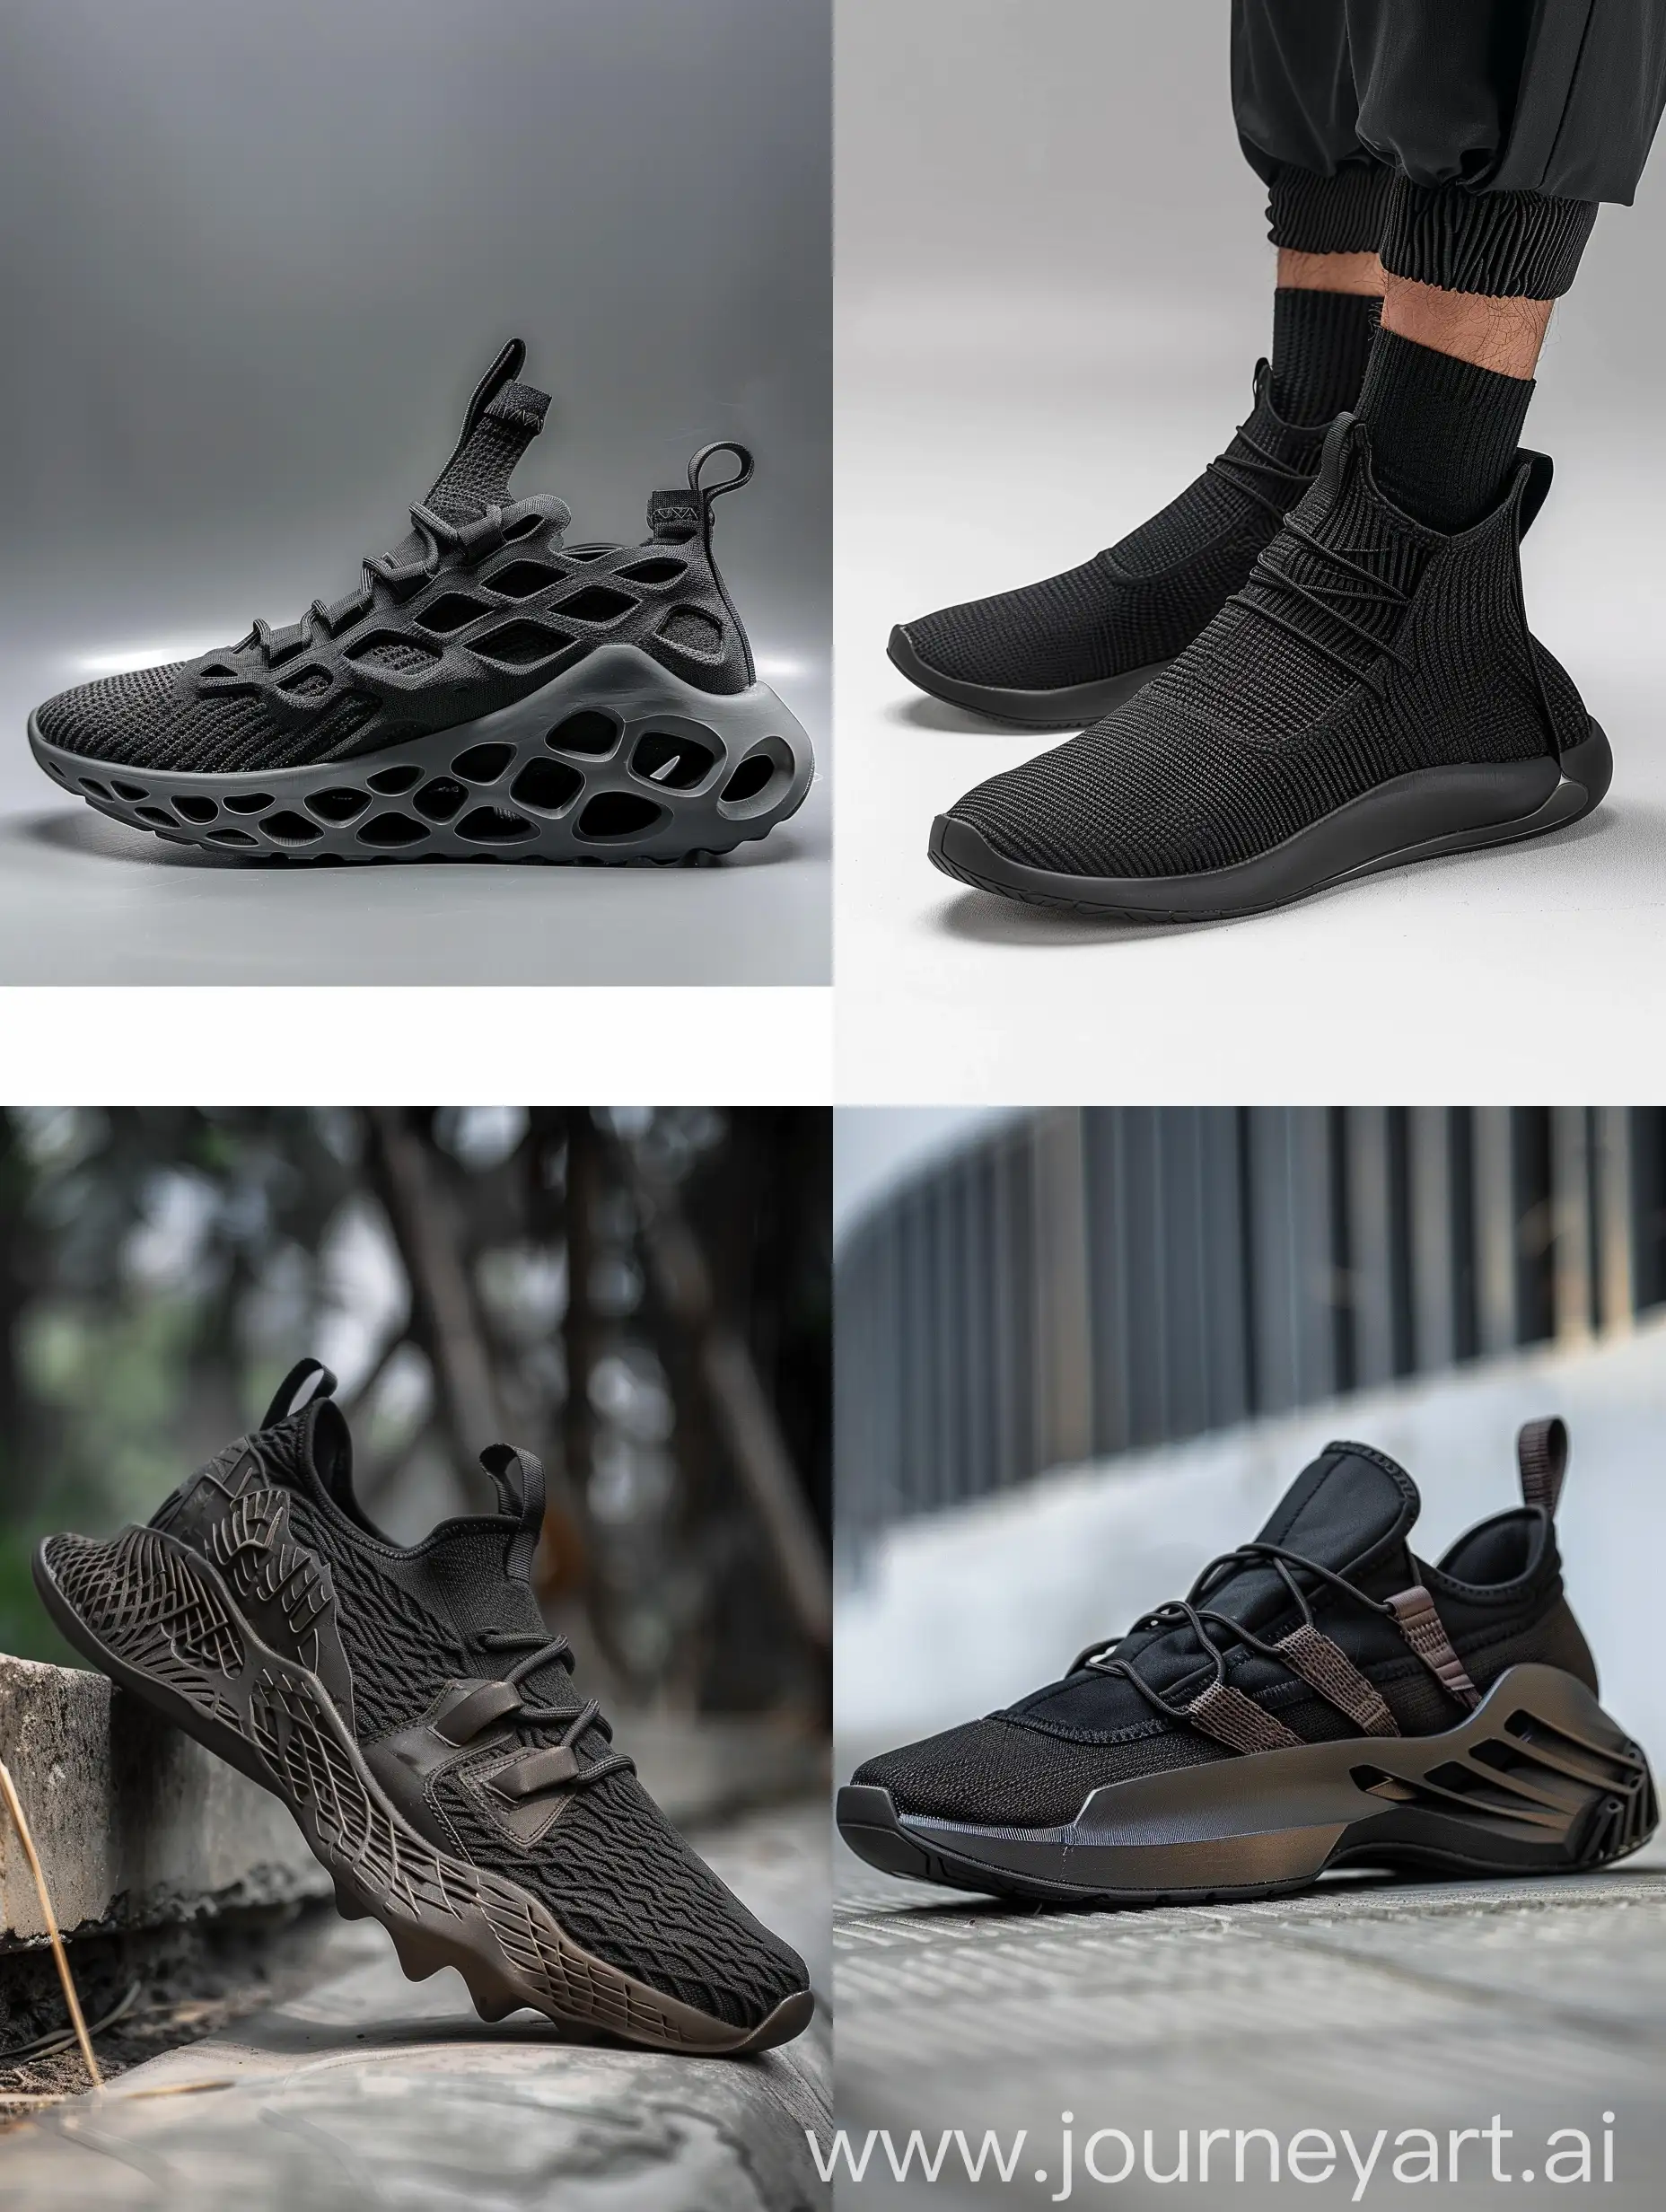 Futuristic-3D-Printed-Black-Sneakers-Inspired-by-Ancient-Egypt-with-No-Laces